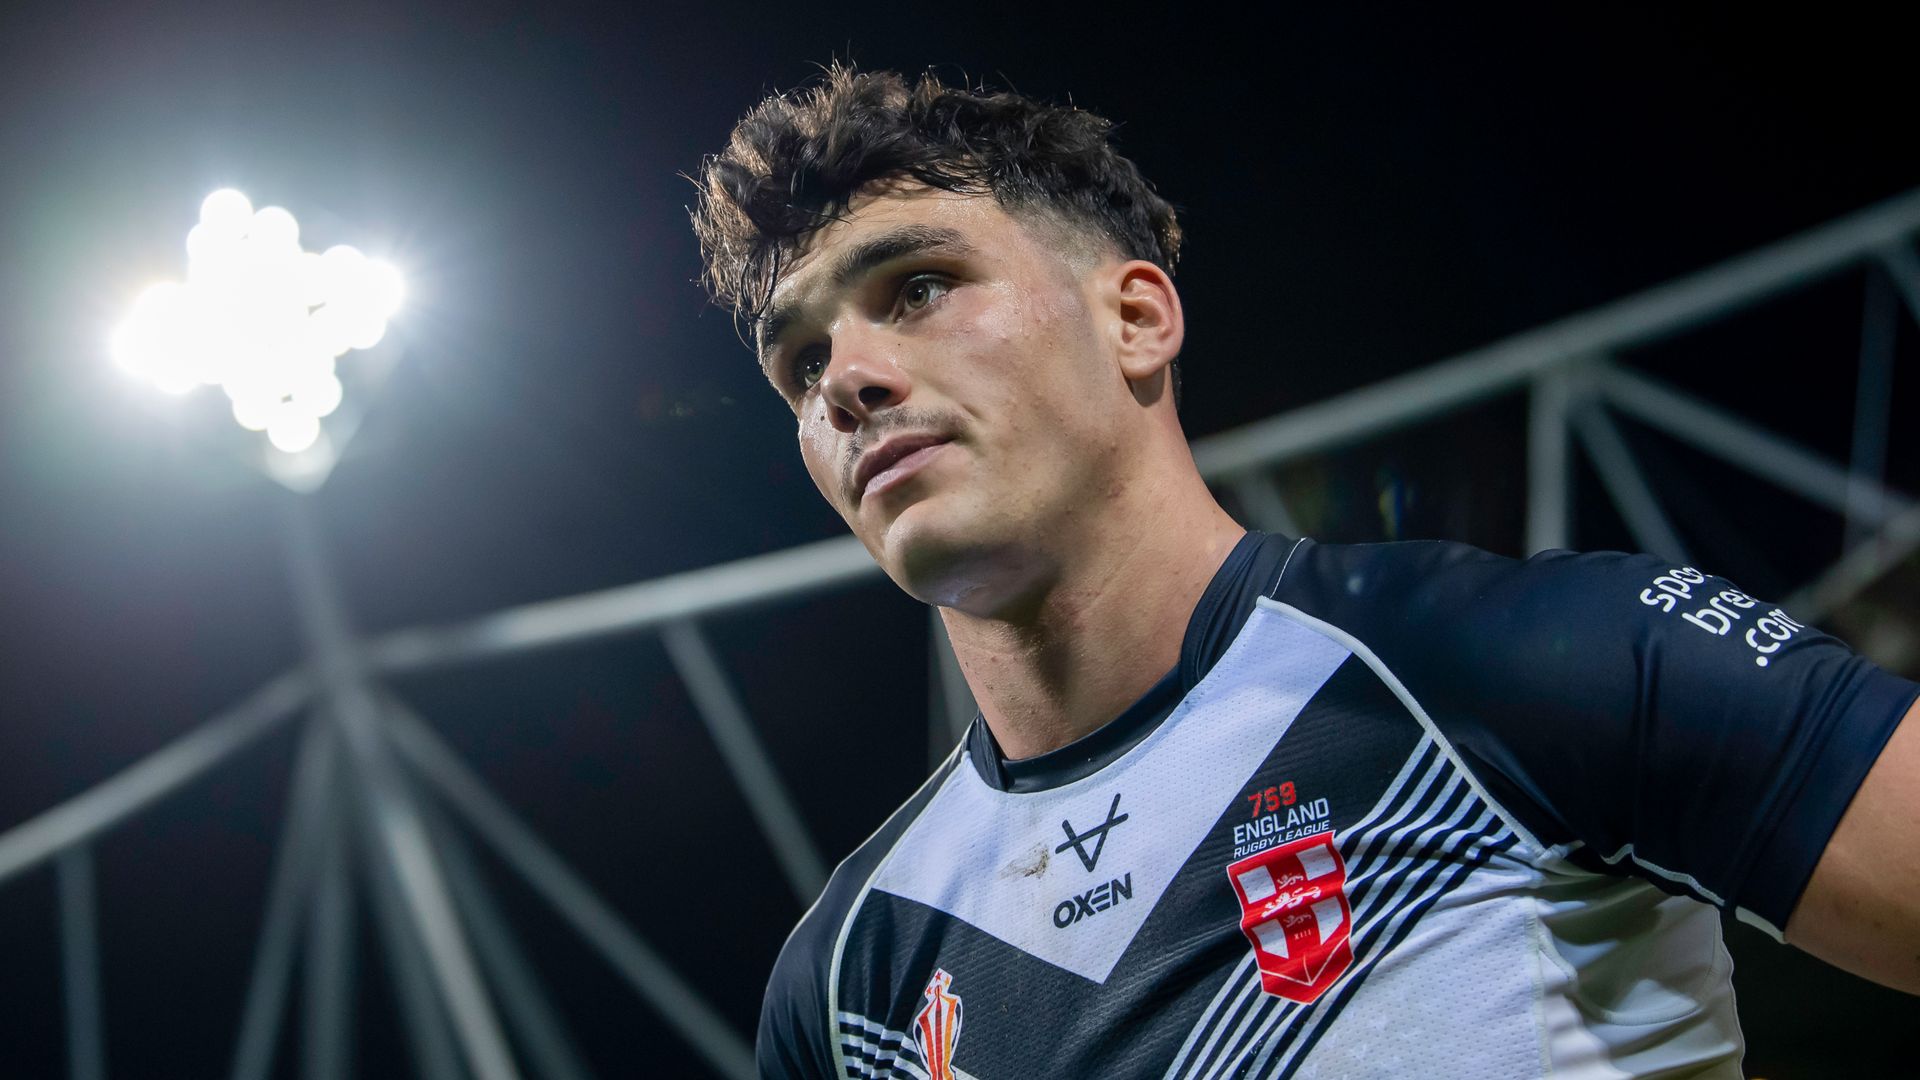 'The football stuff is a bit blown up' - why RL was always Farnworth's love